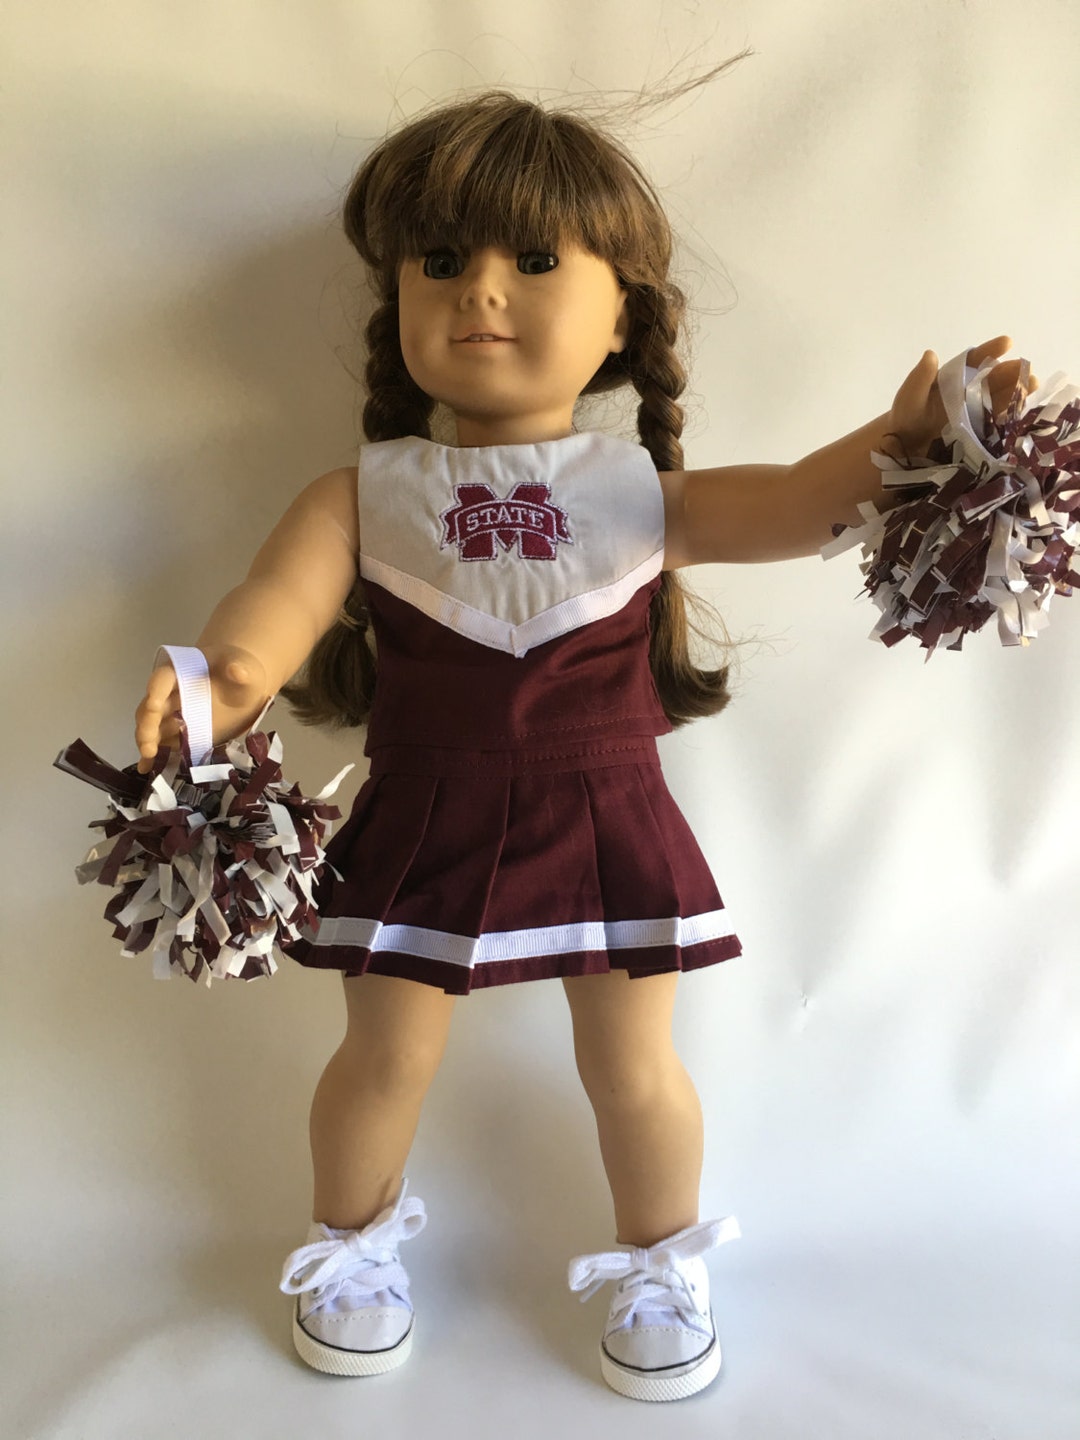 18 Doll Cheer Outfit With Mississippi State Logo and Matching Pompoms -   Canada